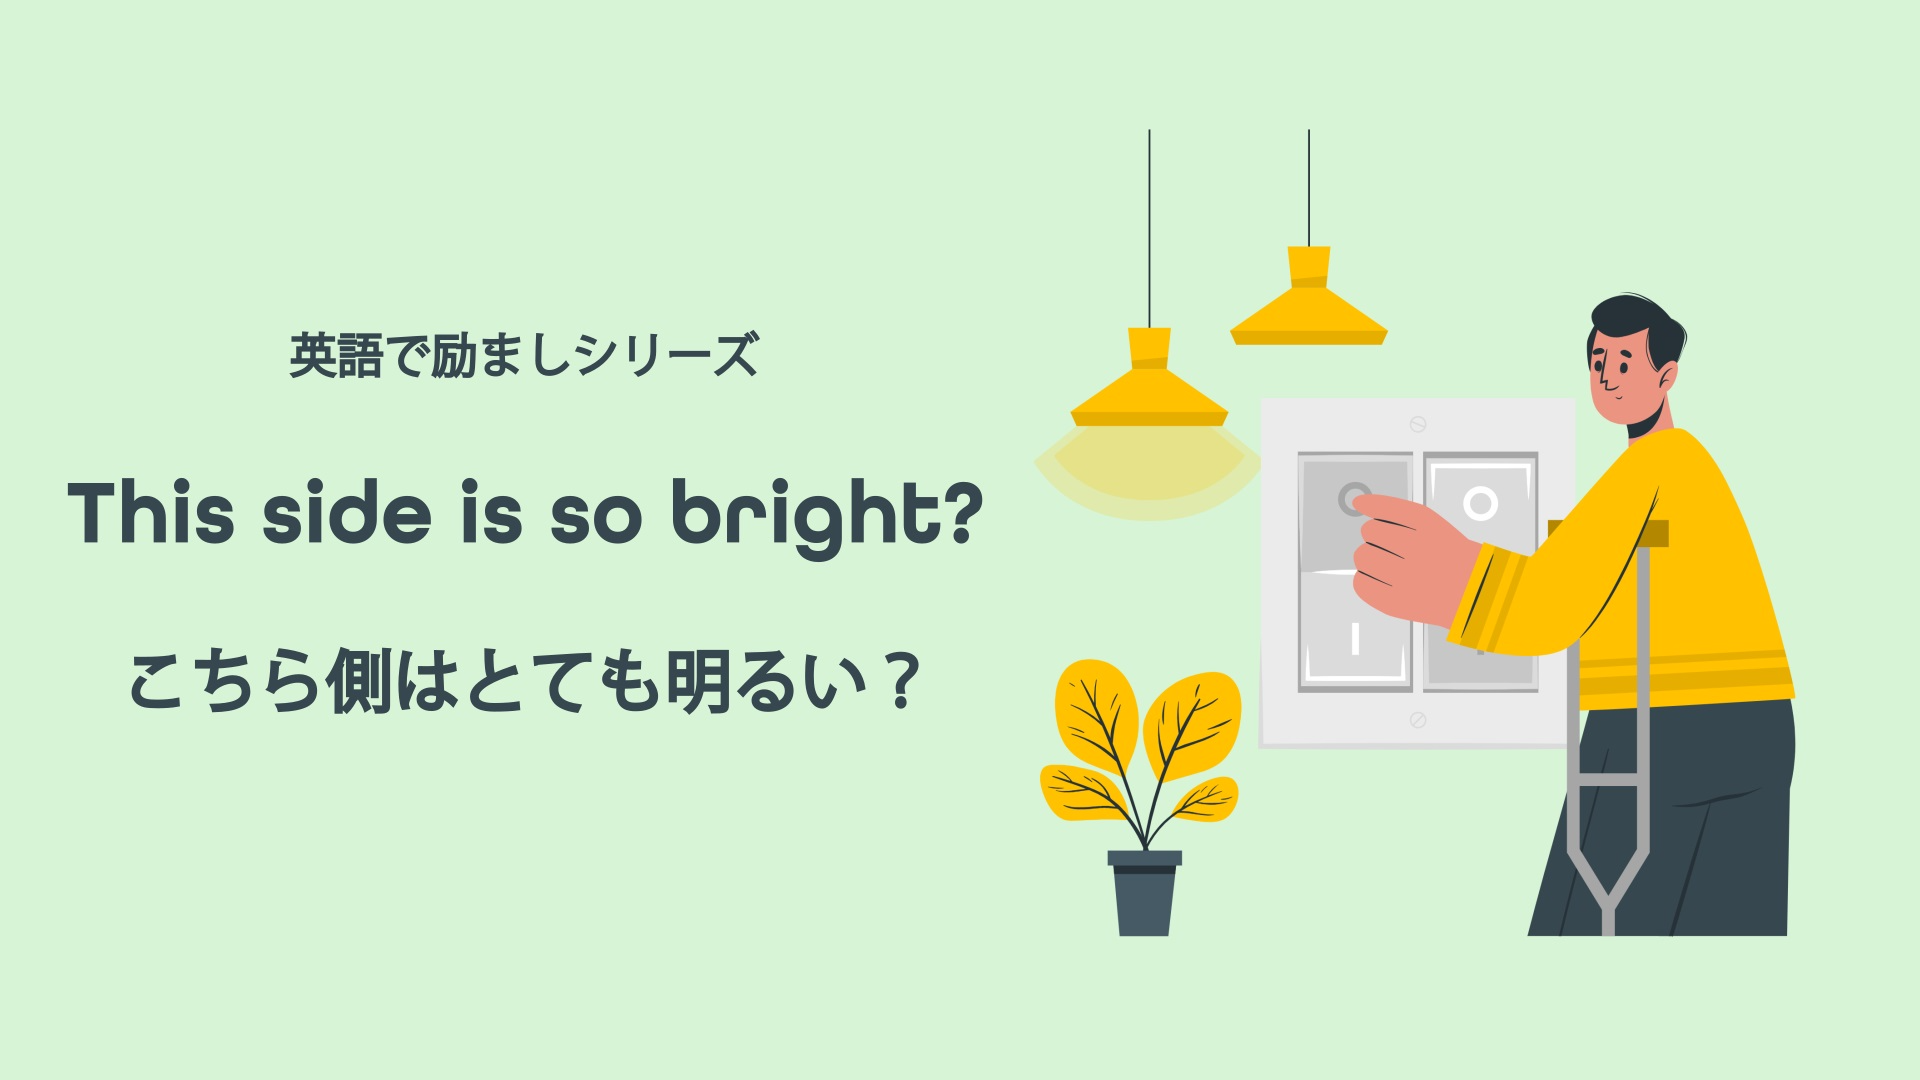 Featured image for “This side is so bright ? こちら側はとても明るい？”